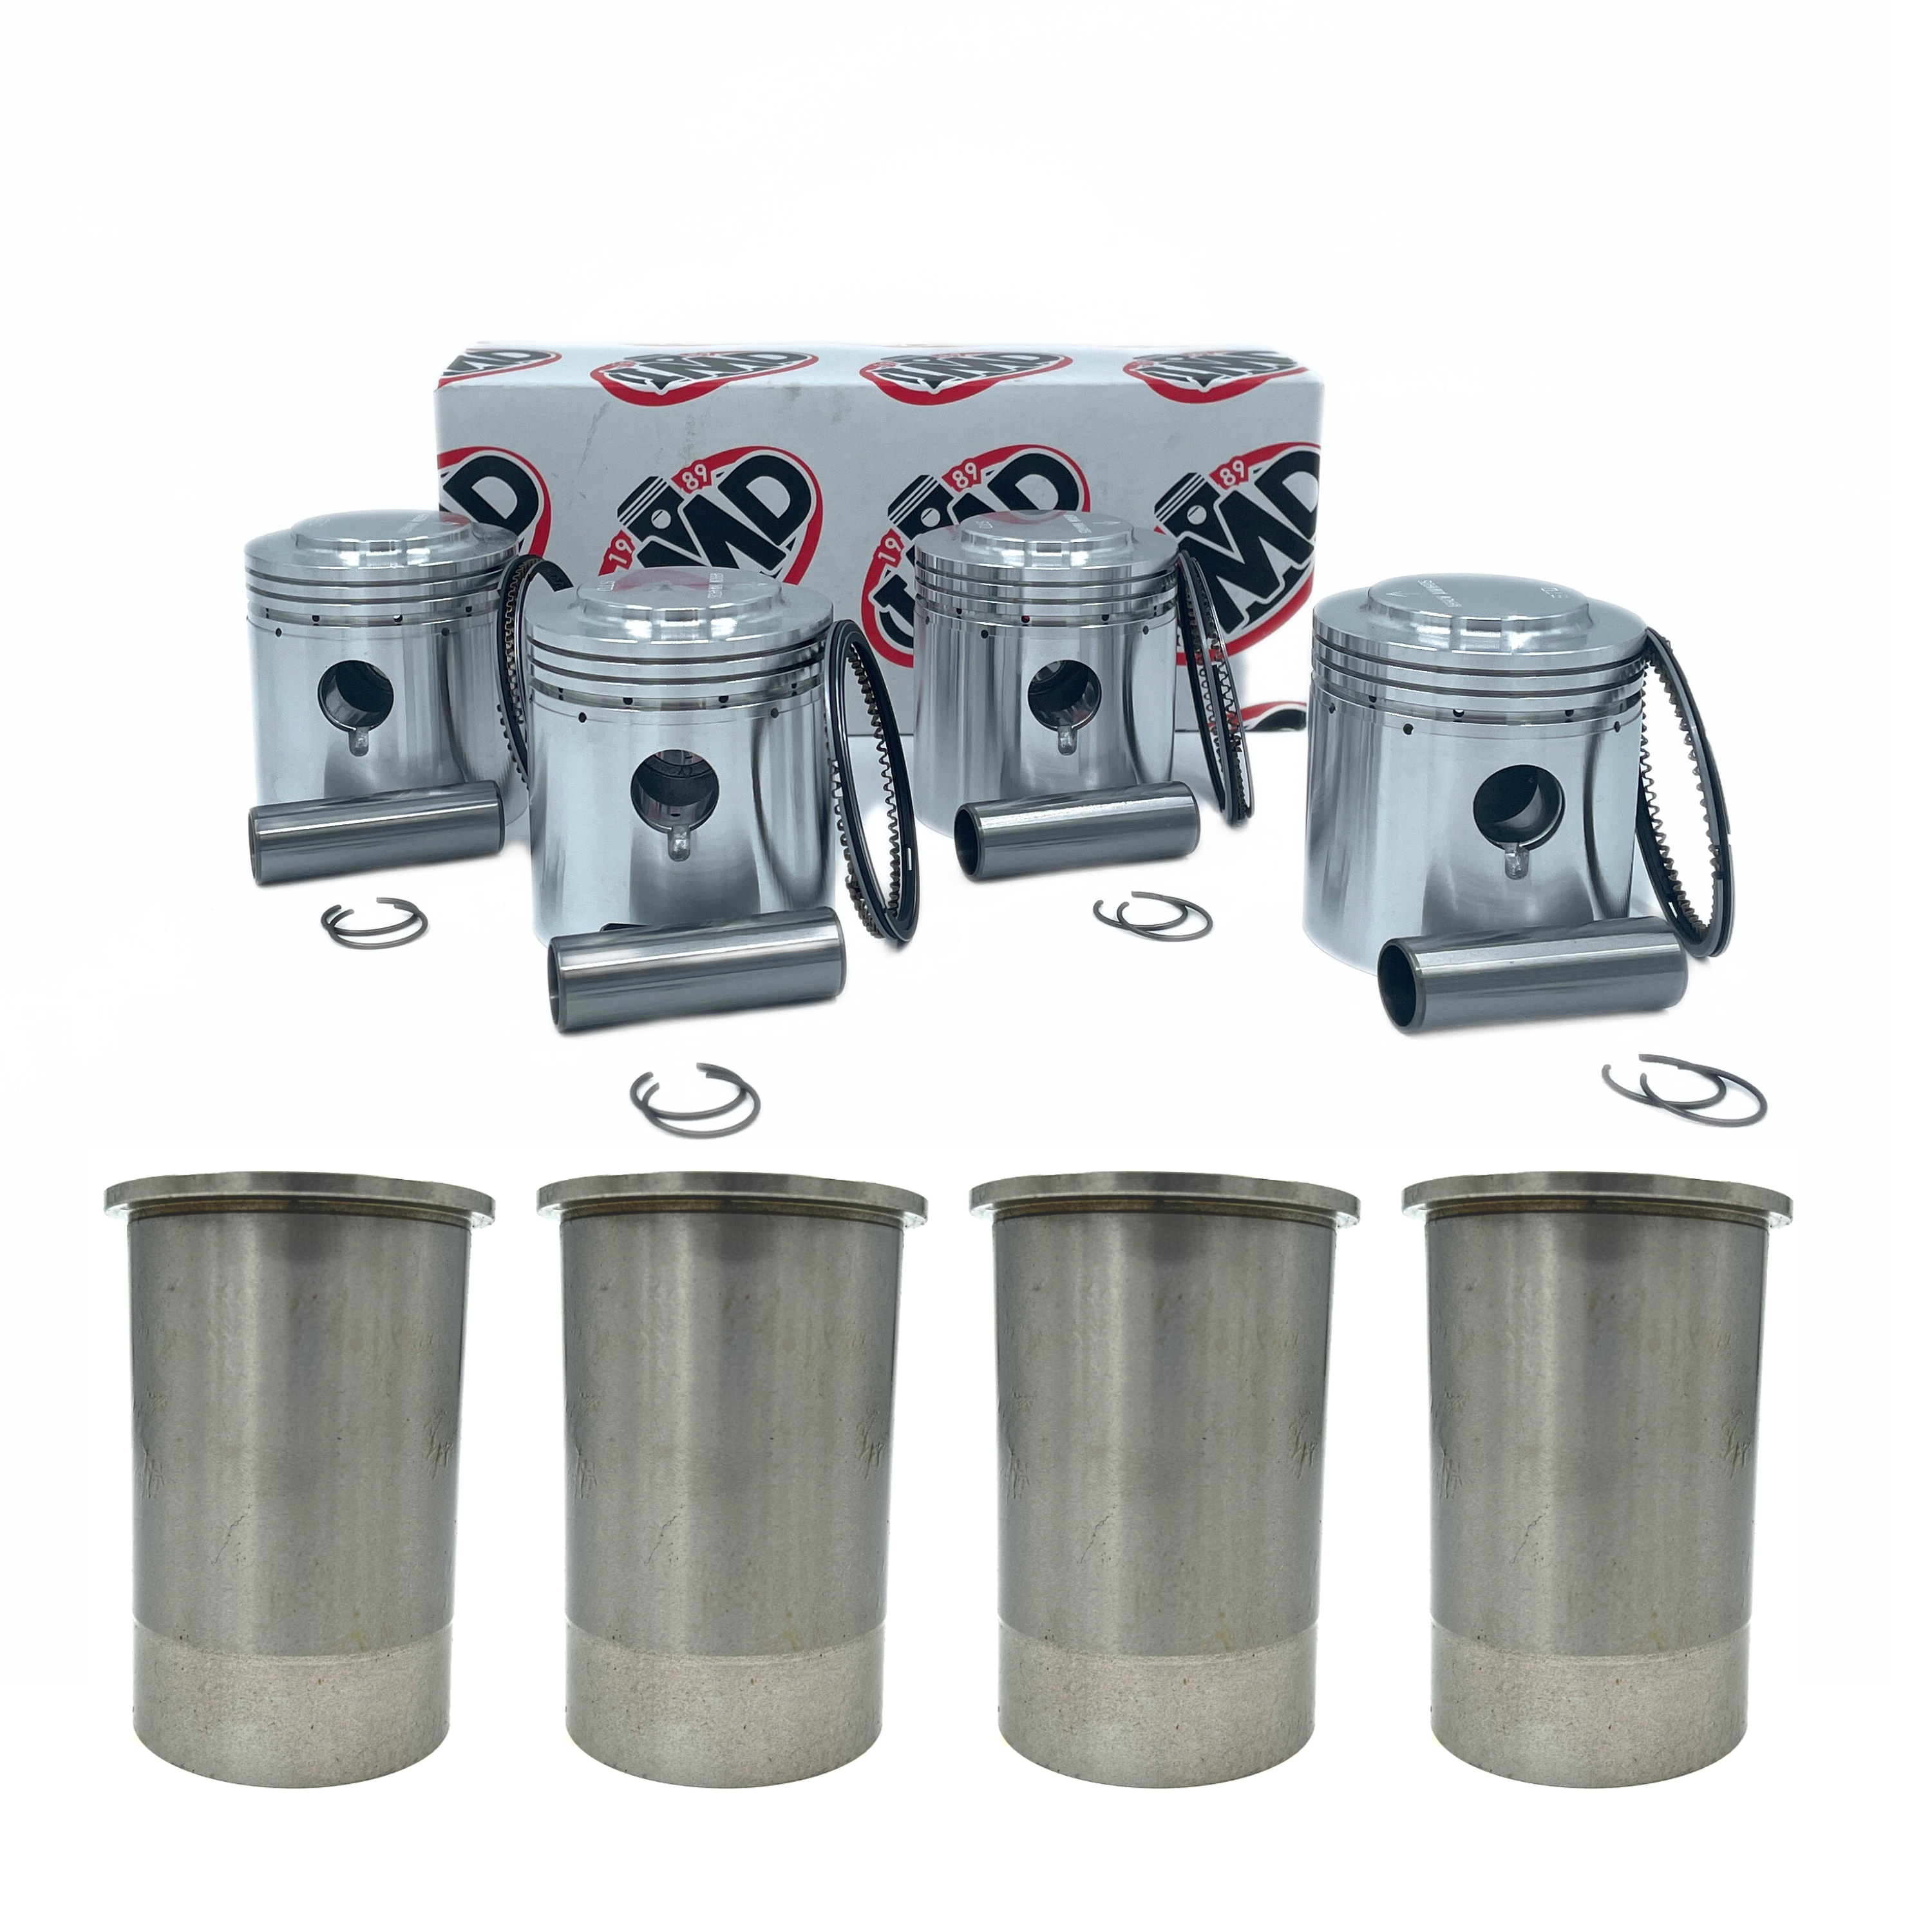 ARIEL SQUARE FOUR 4G MKI & MkII 1000cc PISTON KITS (4) & CYLINDER SLEEVES LINERS (4)